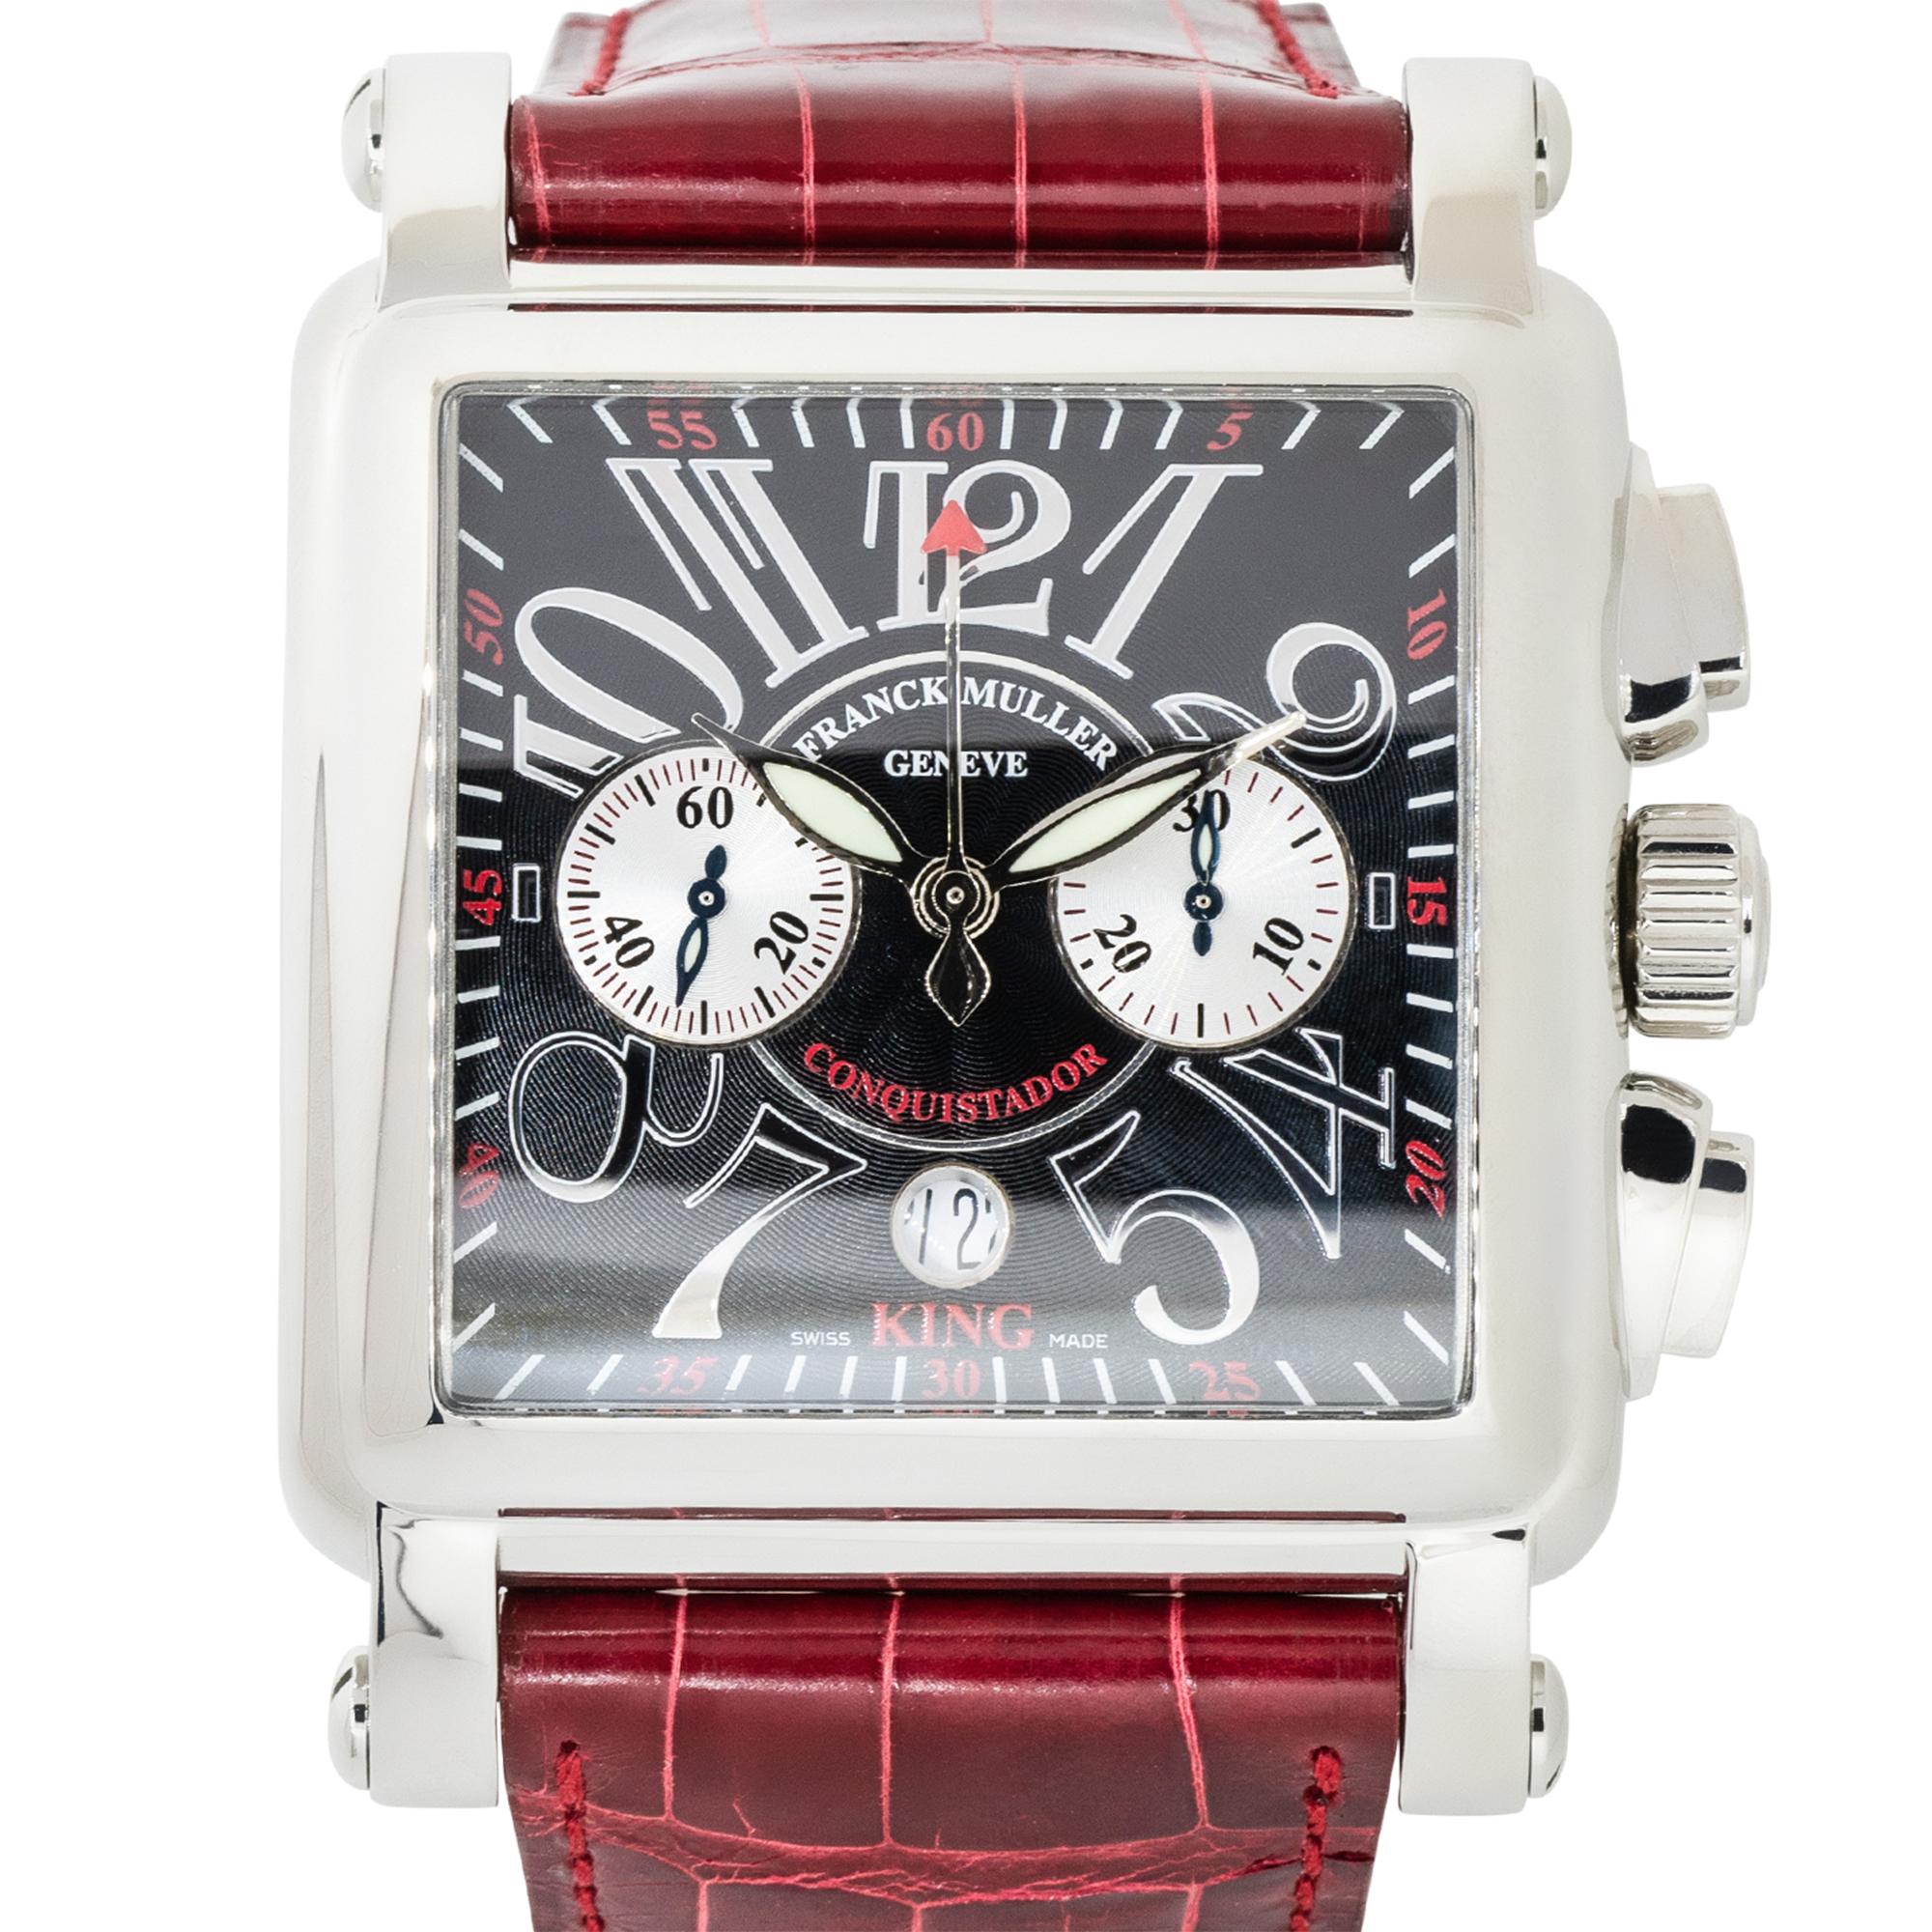 Brand: Franck Muller
MPN: 10000
Model: Conquistador K CC AC
Case Material: Stainless Steel
Case Diameter: 45 mm
Crystal: Scratch resistant sapphire
Bezel: Stainless Steel
Dial: Black dial with white arabic numerals and two sub dials. Date can be